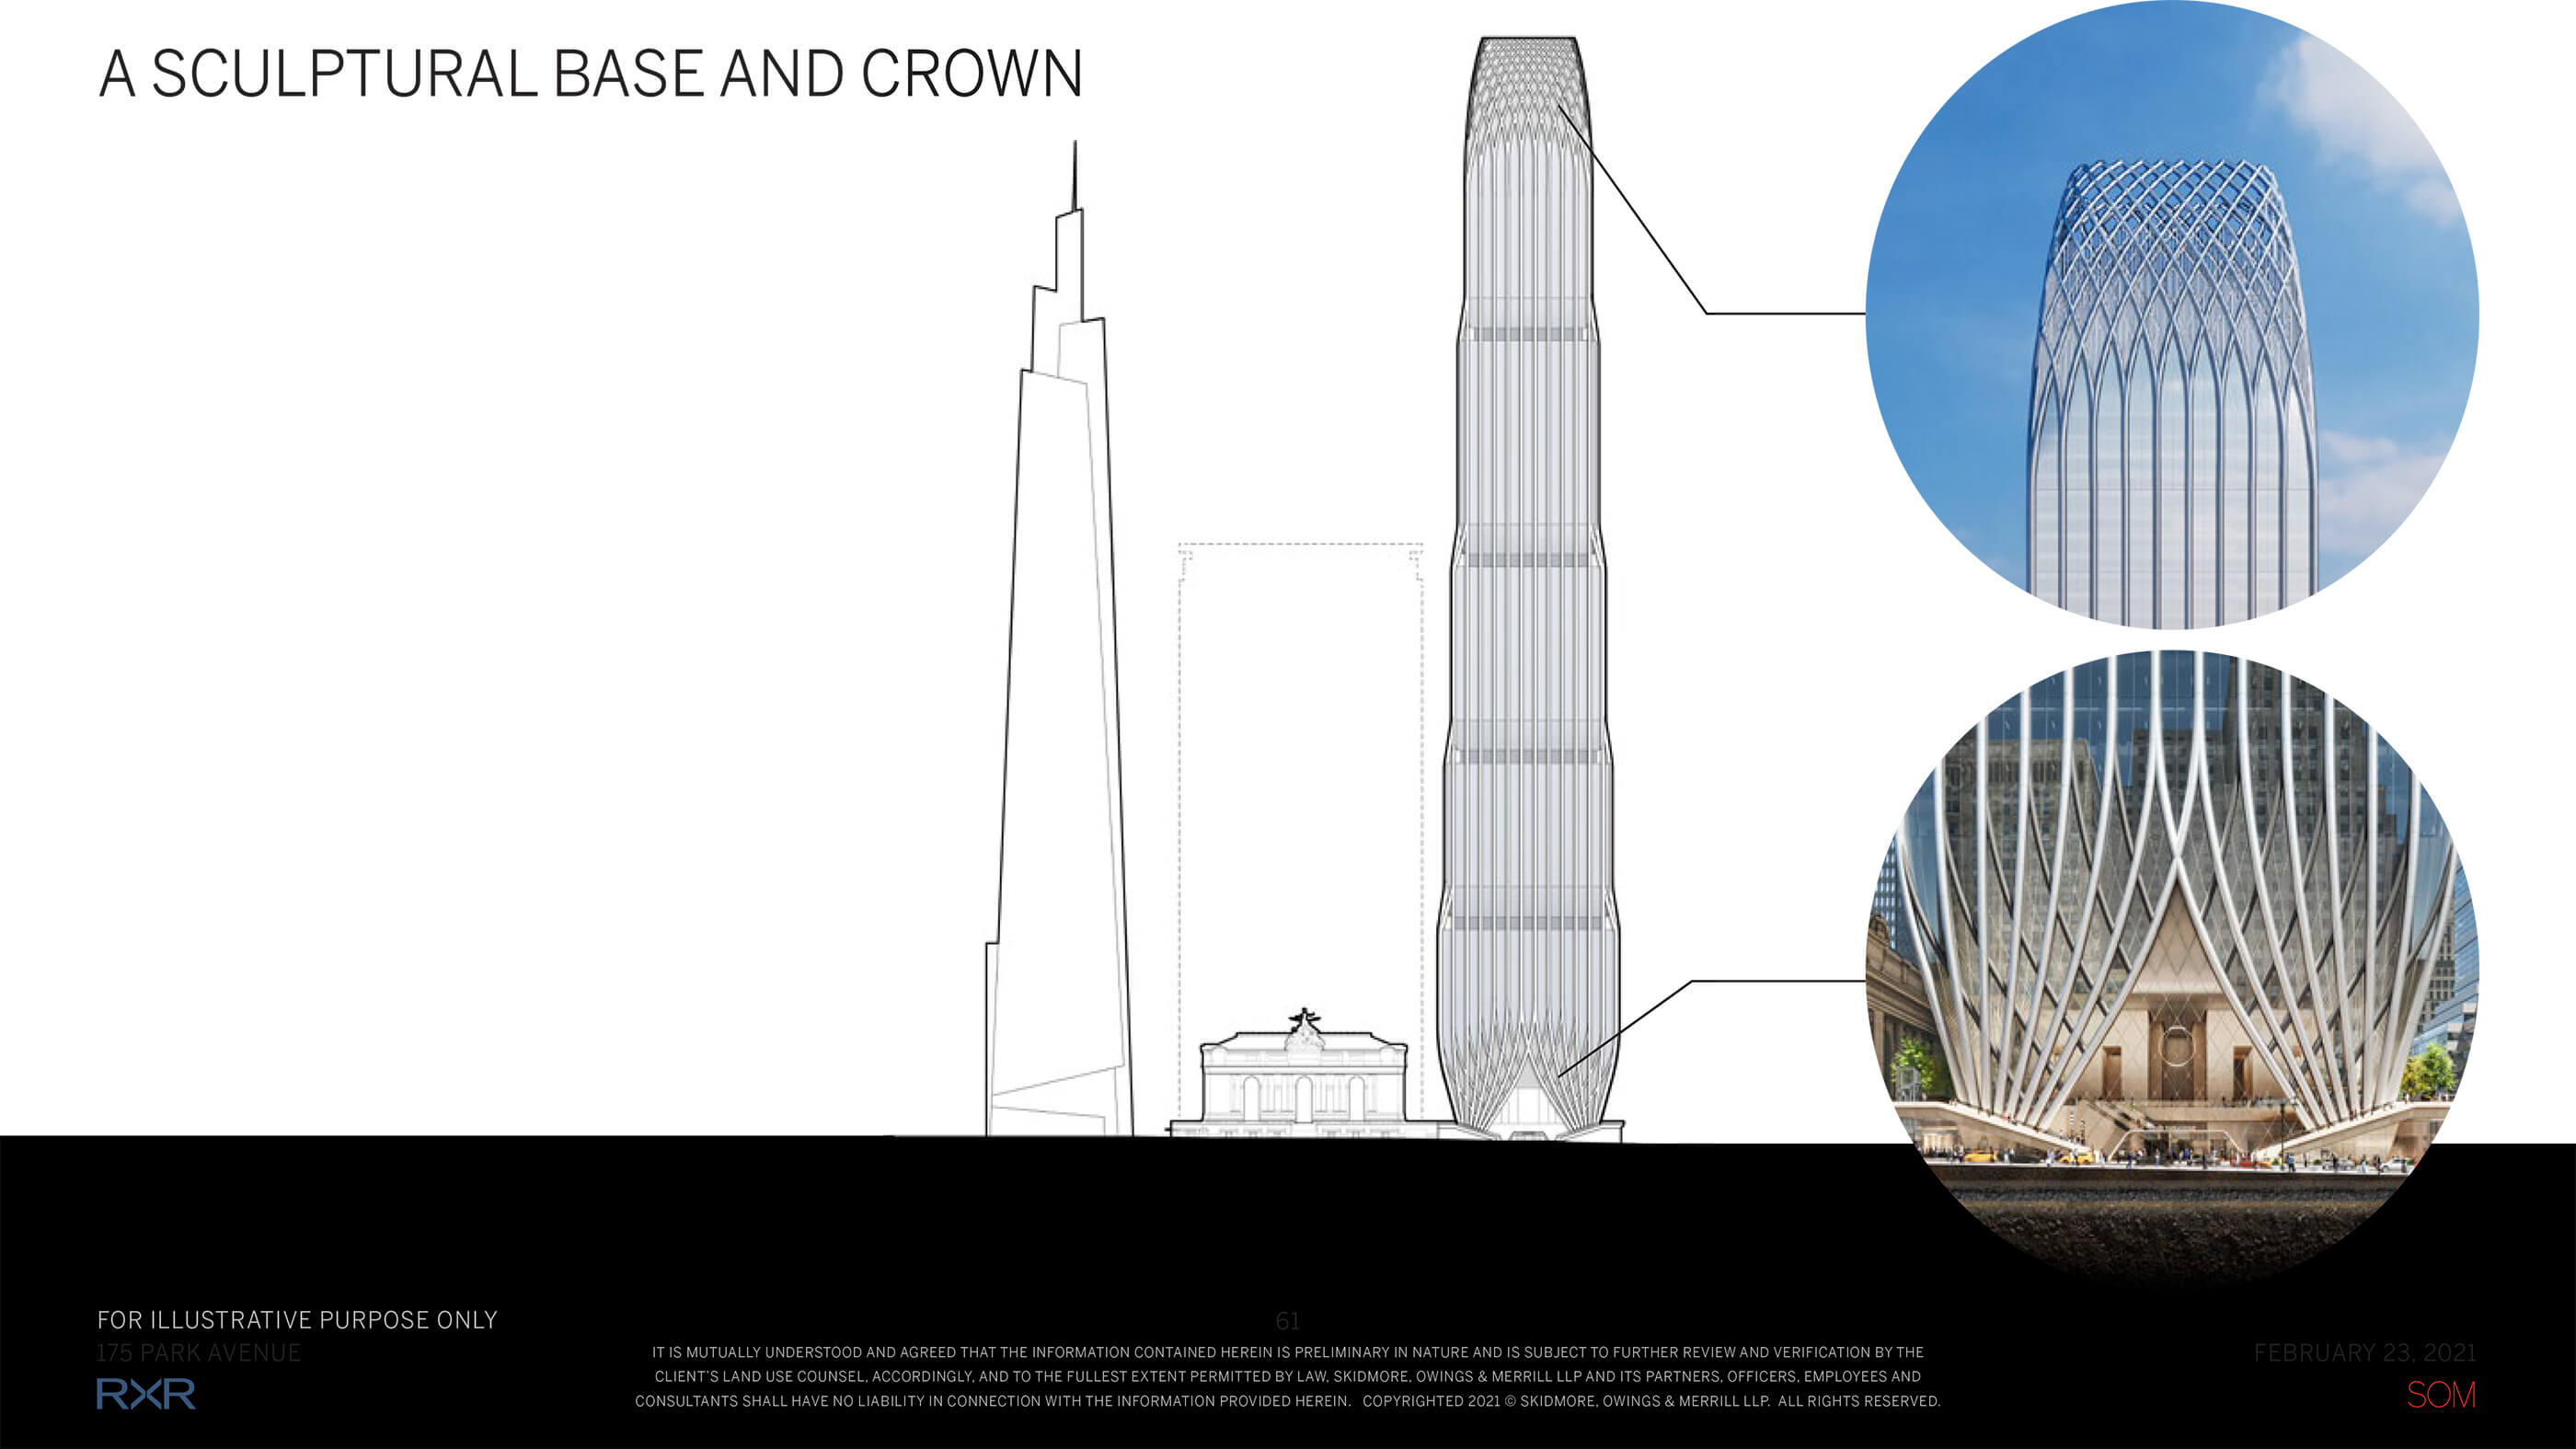 A diagram depicting the base and crown of project commodore and its neighbors